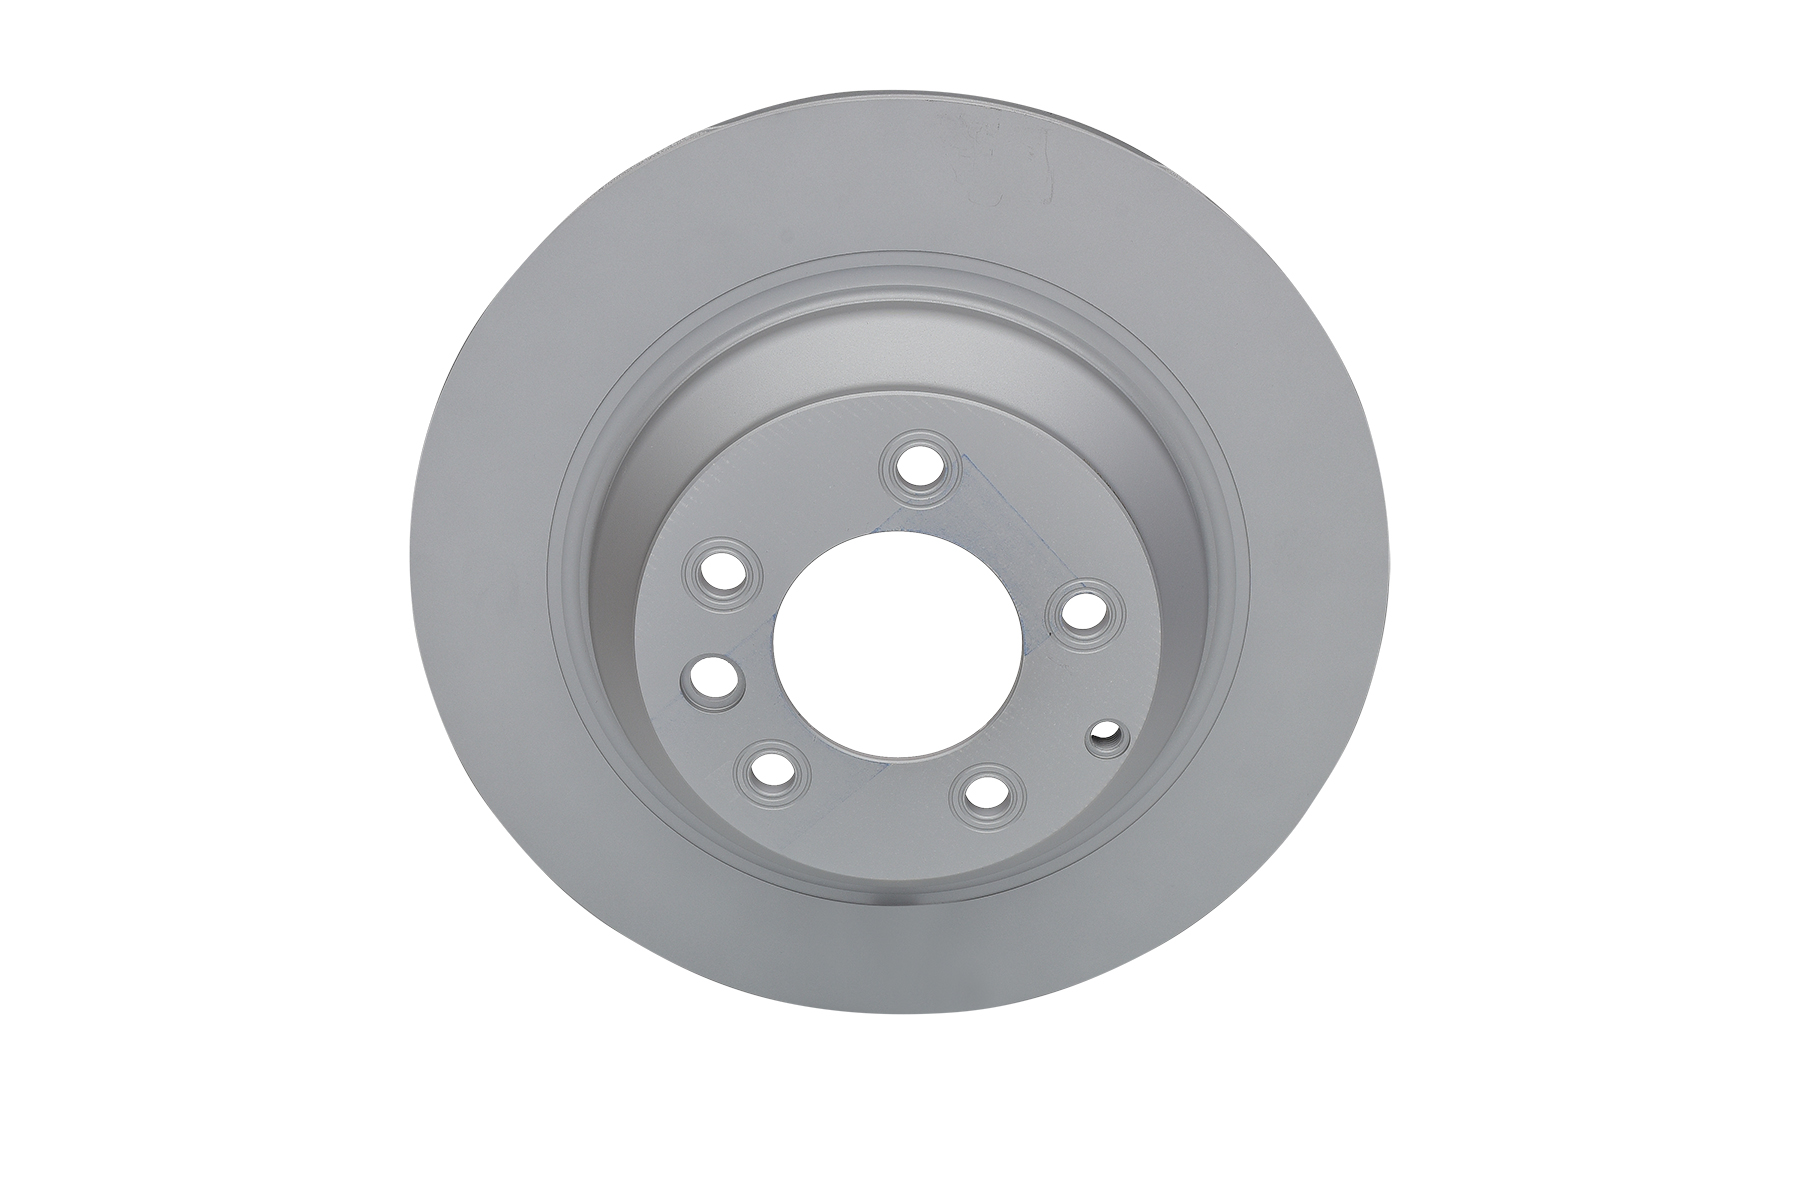 ATE 24.0128-0169.1 Brake disc 358,0x28,0mm, 5x130,0, Vented, Coated, Alloyed/High-carbon